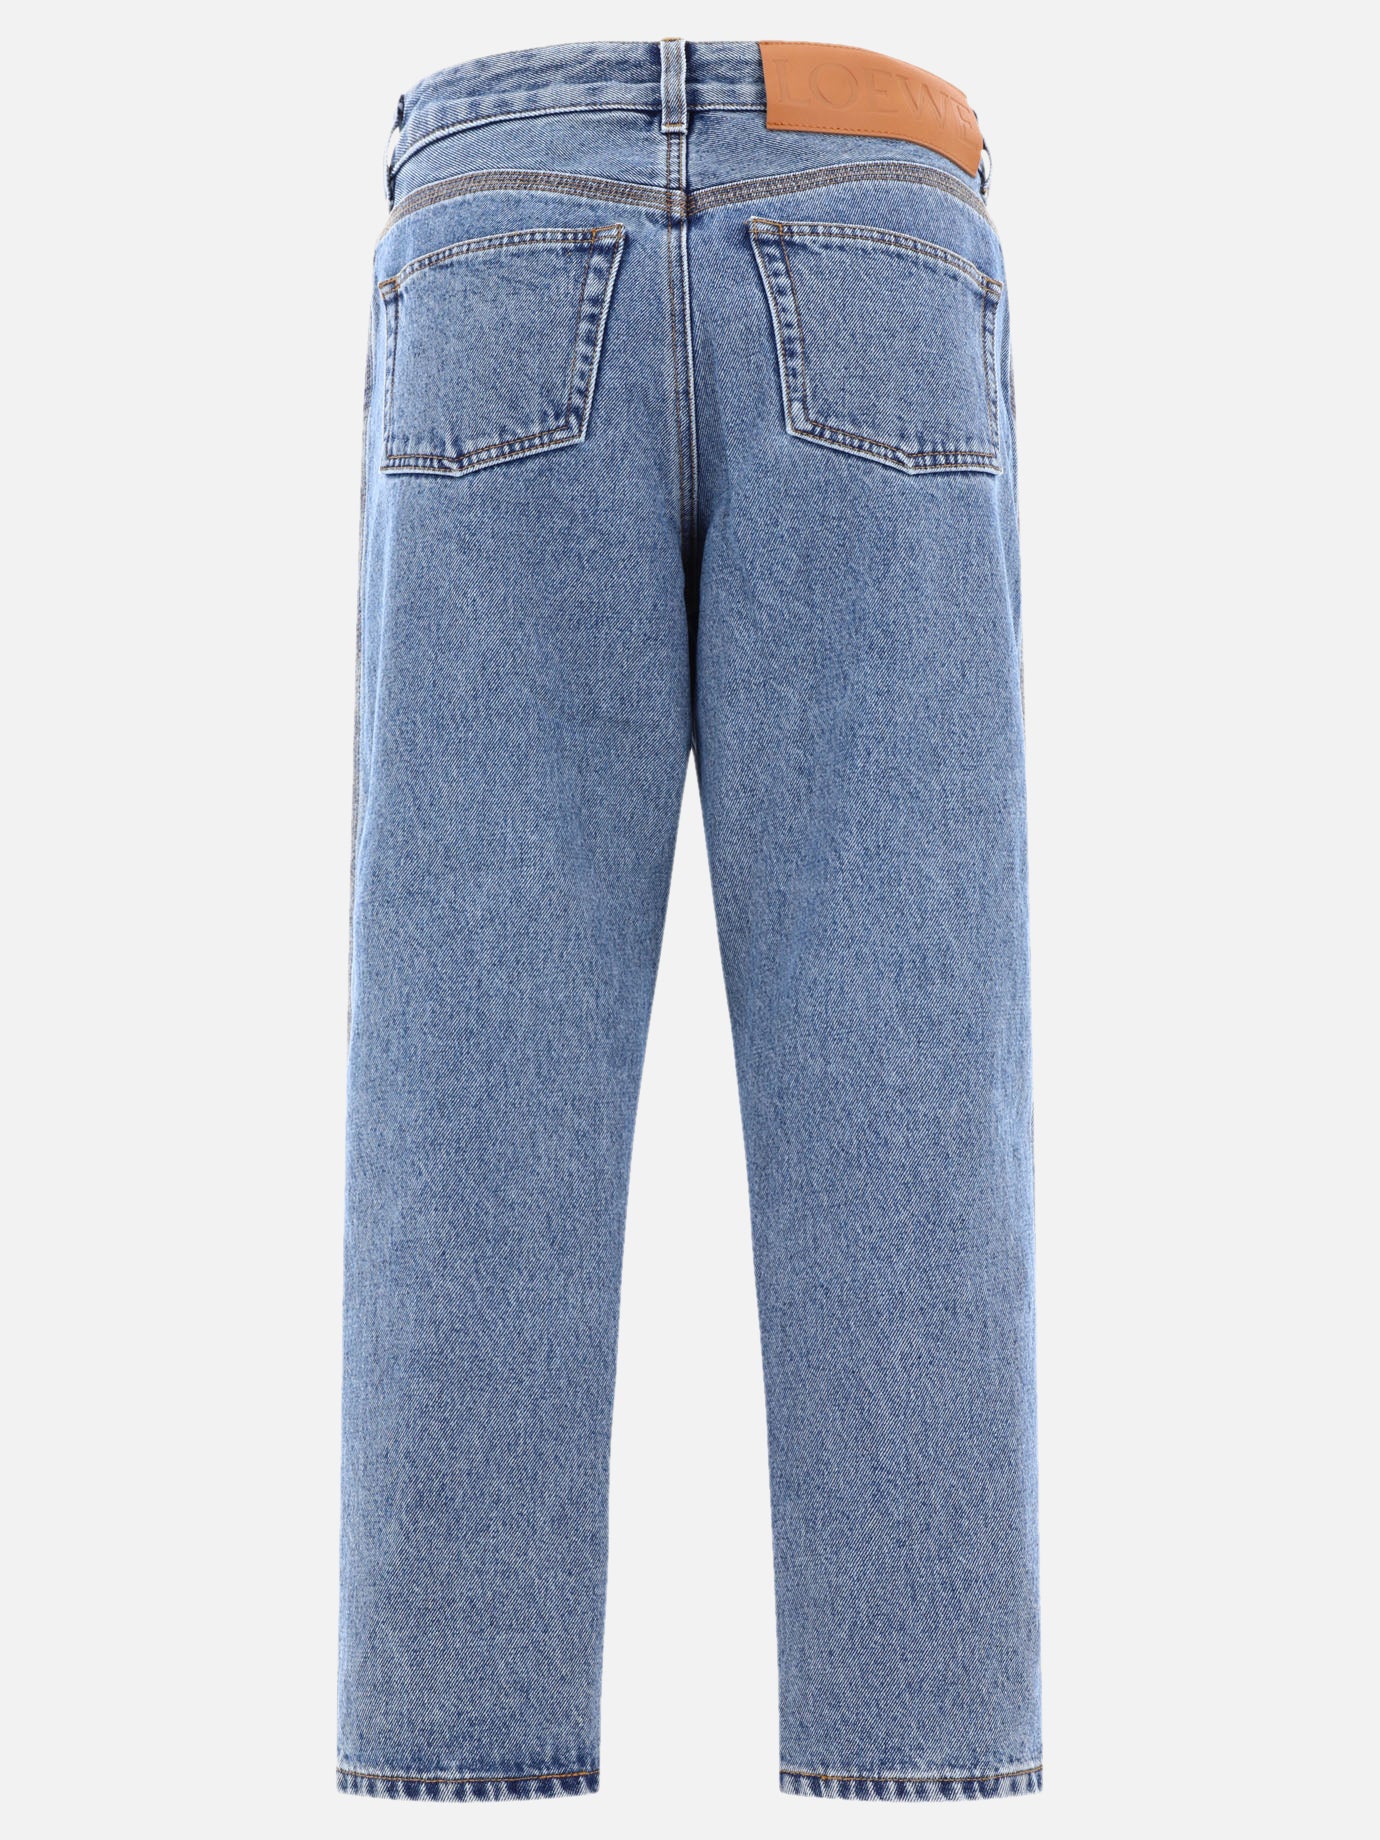 "Anagram" cropped jeans